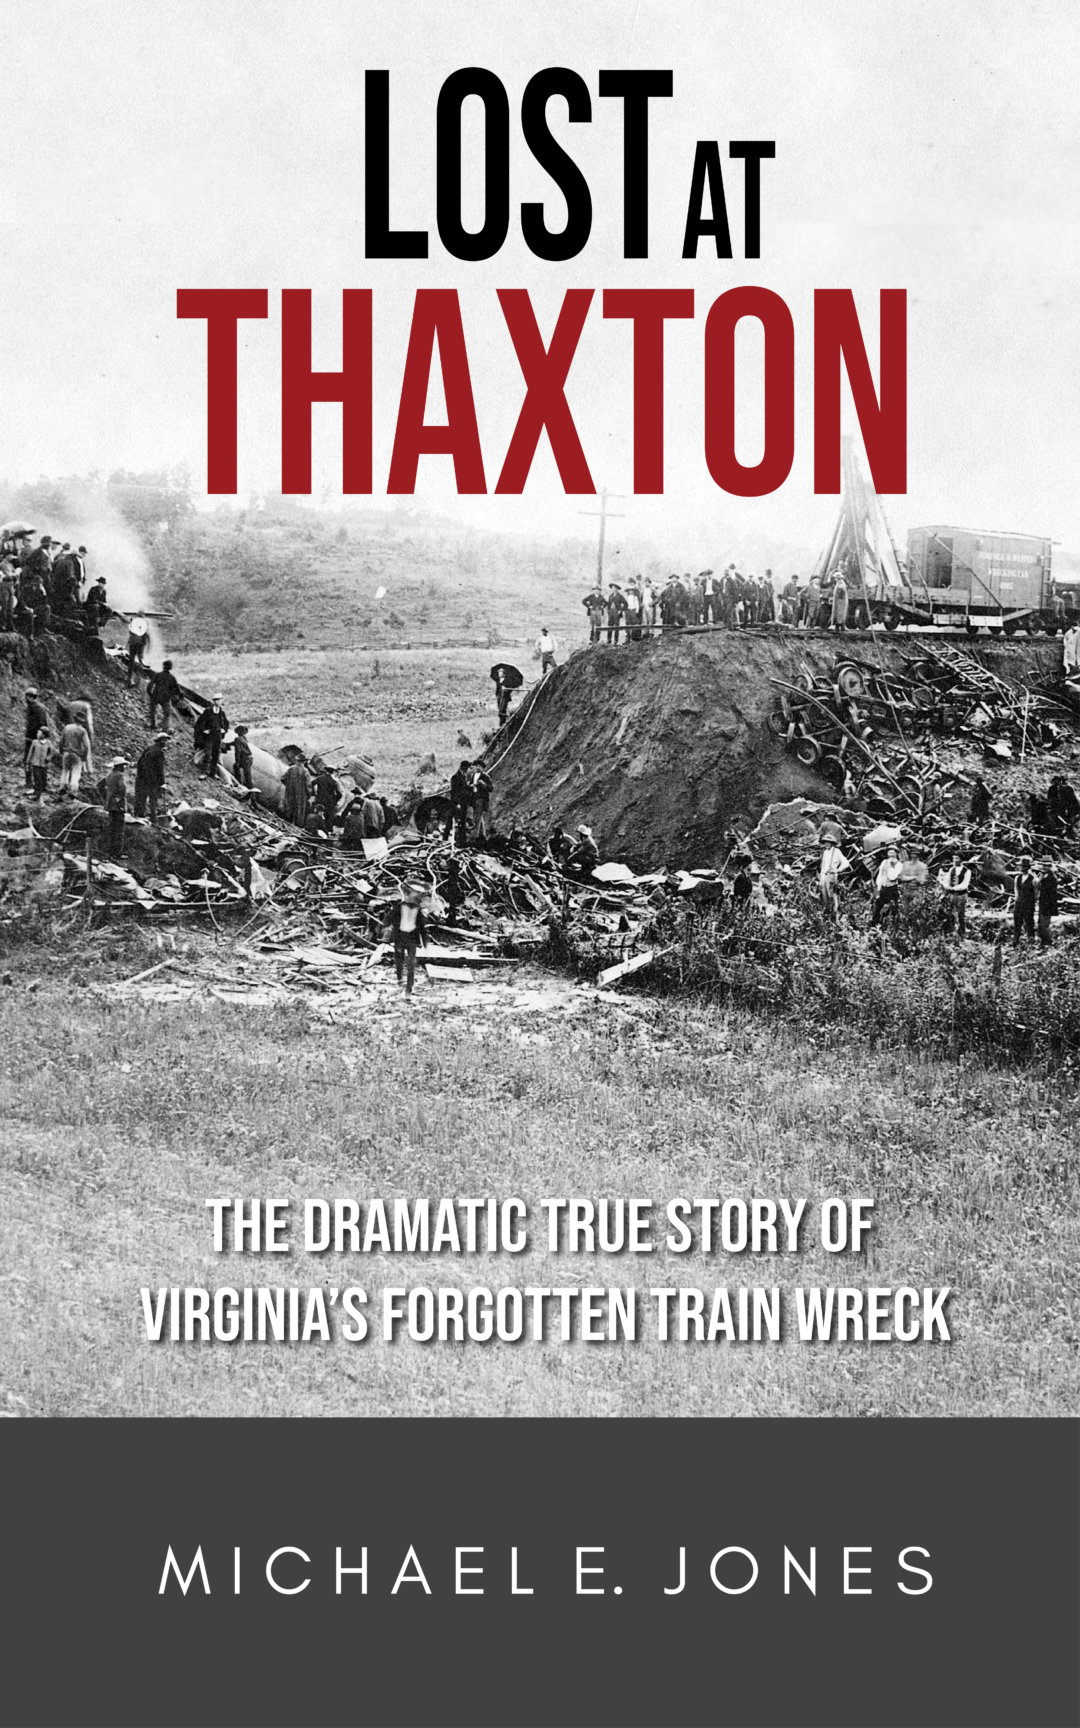 Lost At Thaxton - The Dramatic True Story of Virginia's Forgotten Train Wreck